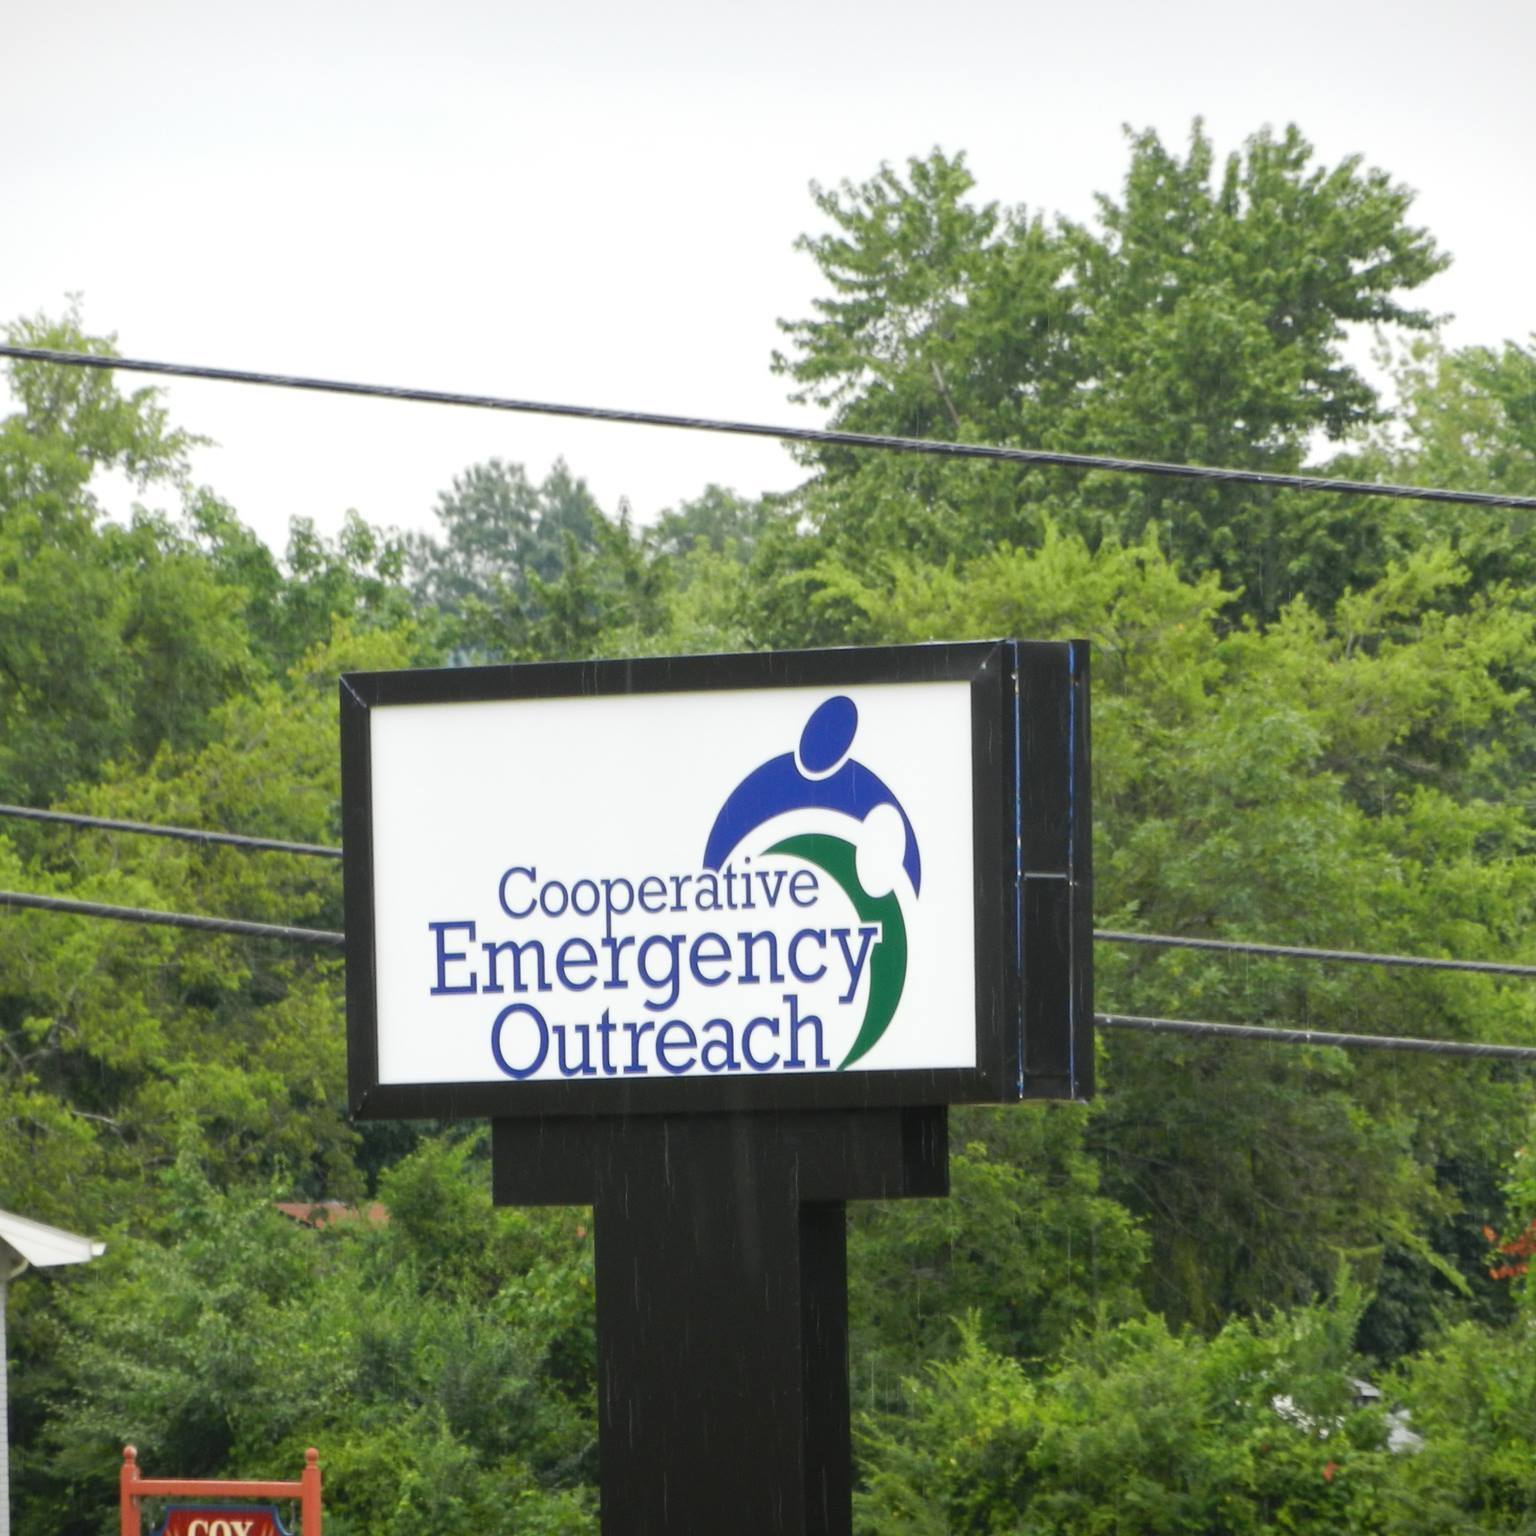 Cooperative Emergency Outreach (ceo)